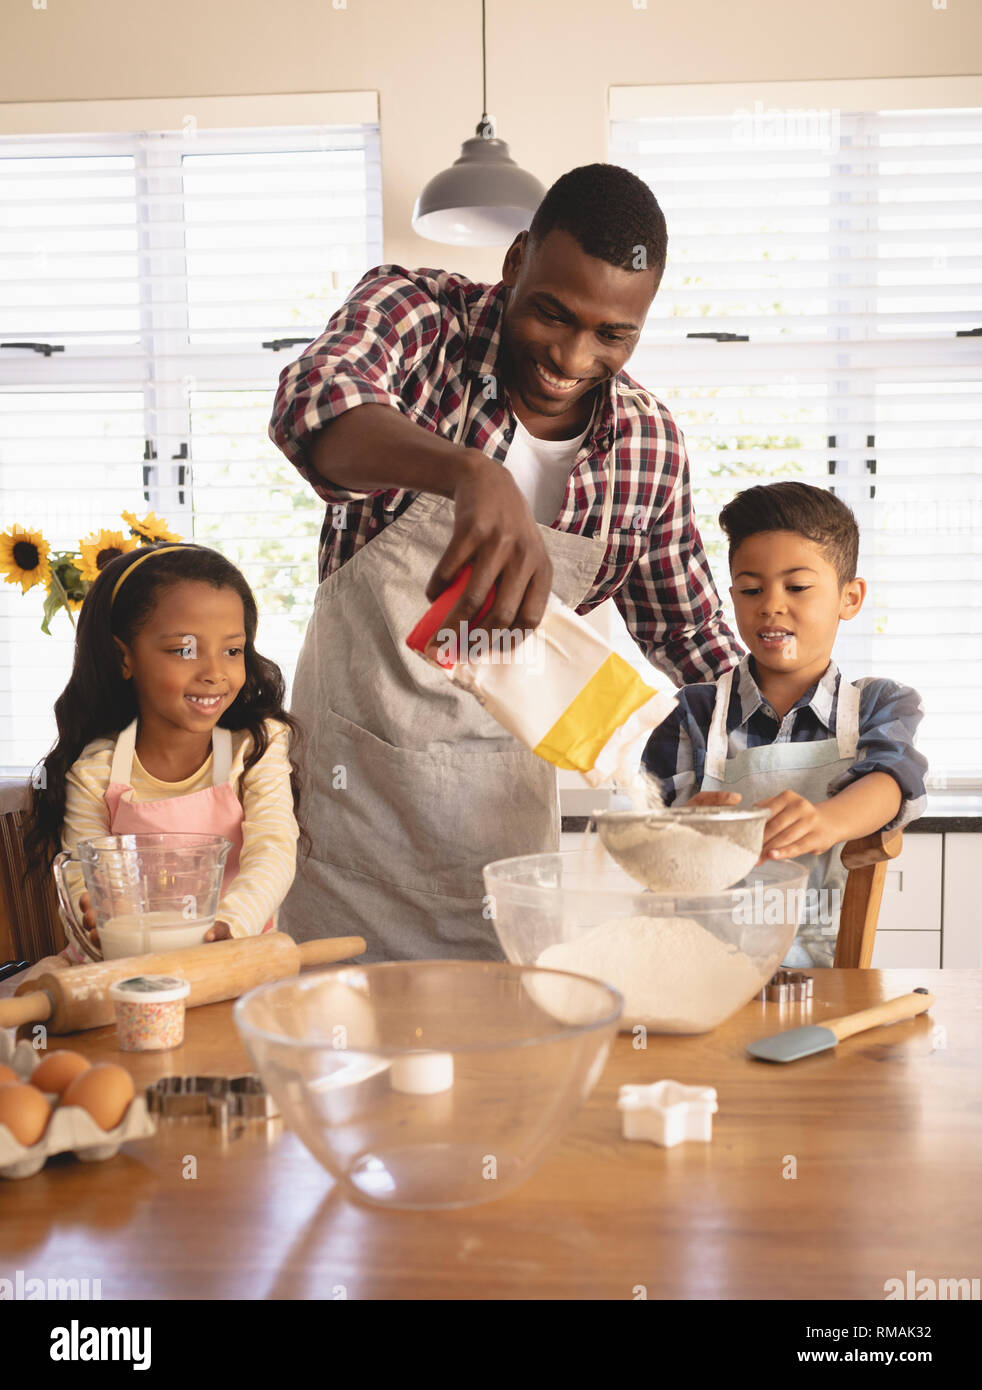 African American father and children baking cookies in kitchen Stock Photo